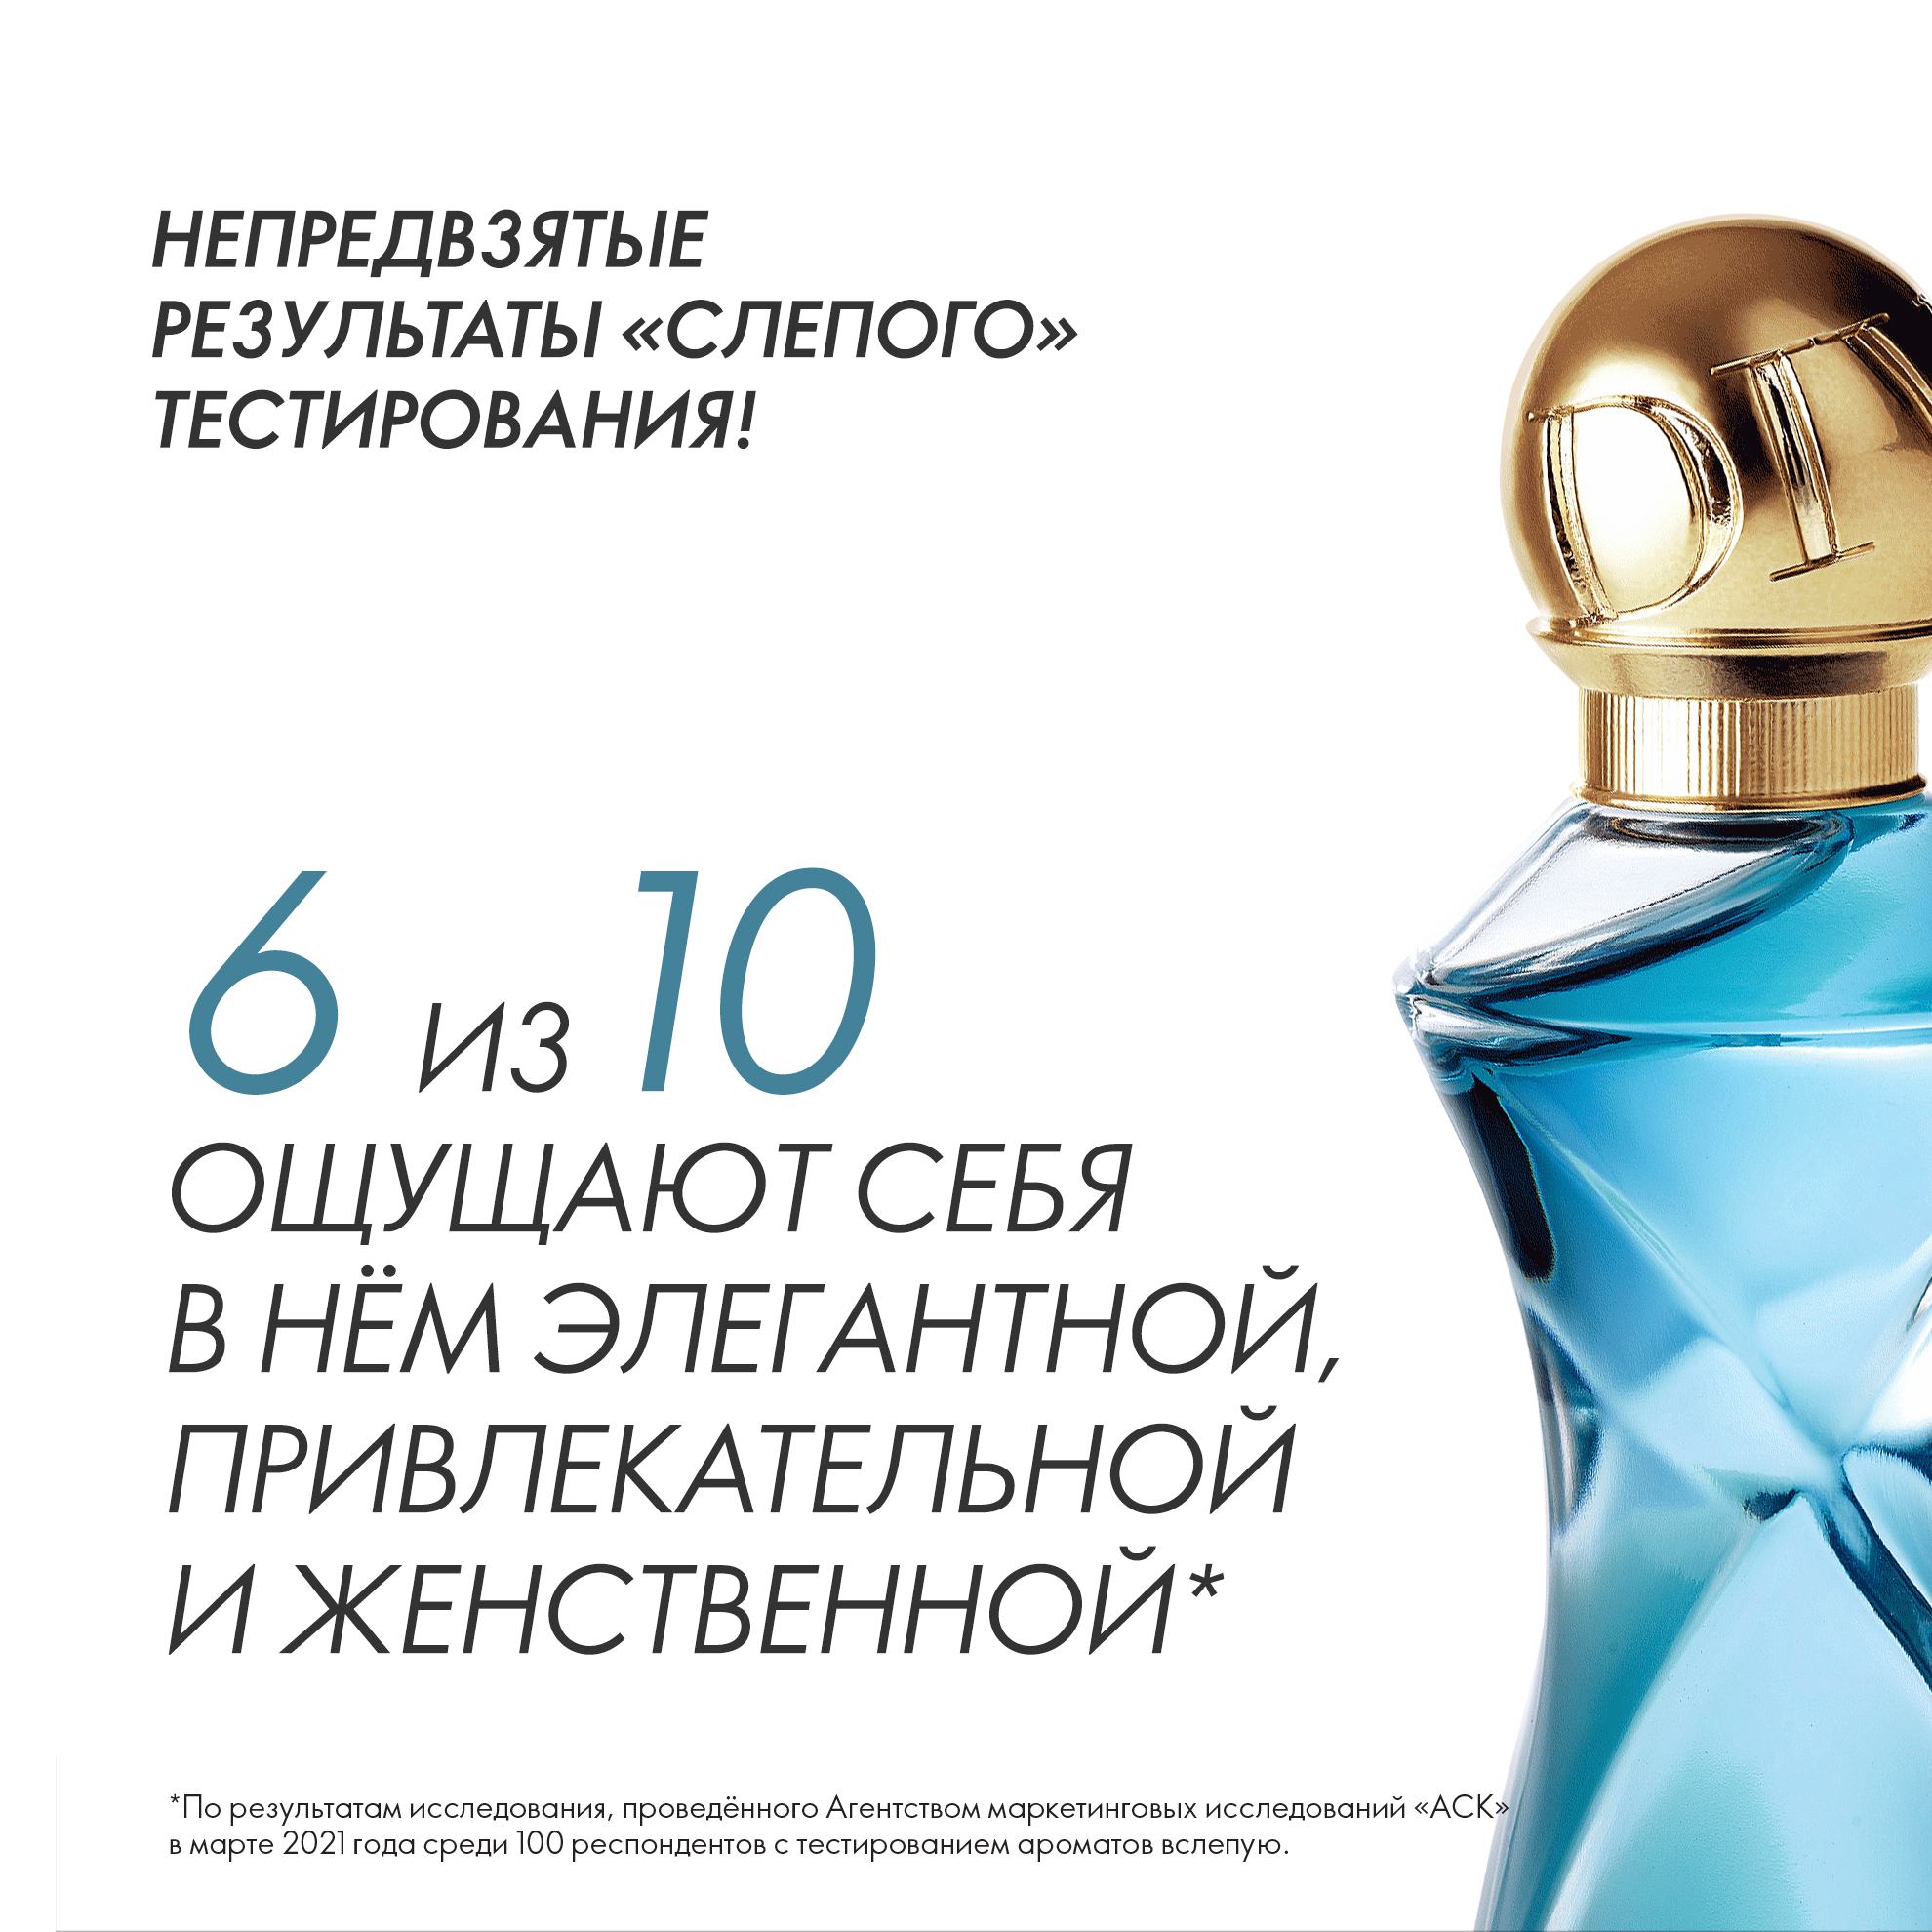 https://media-cdn.oriflame.com/productImage?externalMediaId=product-management-media%2fProducts%2f38497%2fBY%2f38497_6.png&id=15414332&version=1